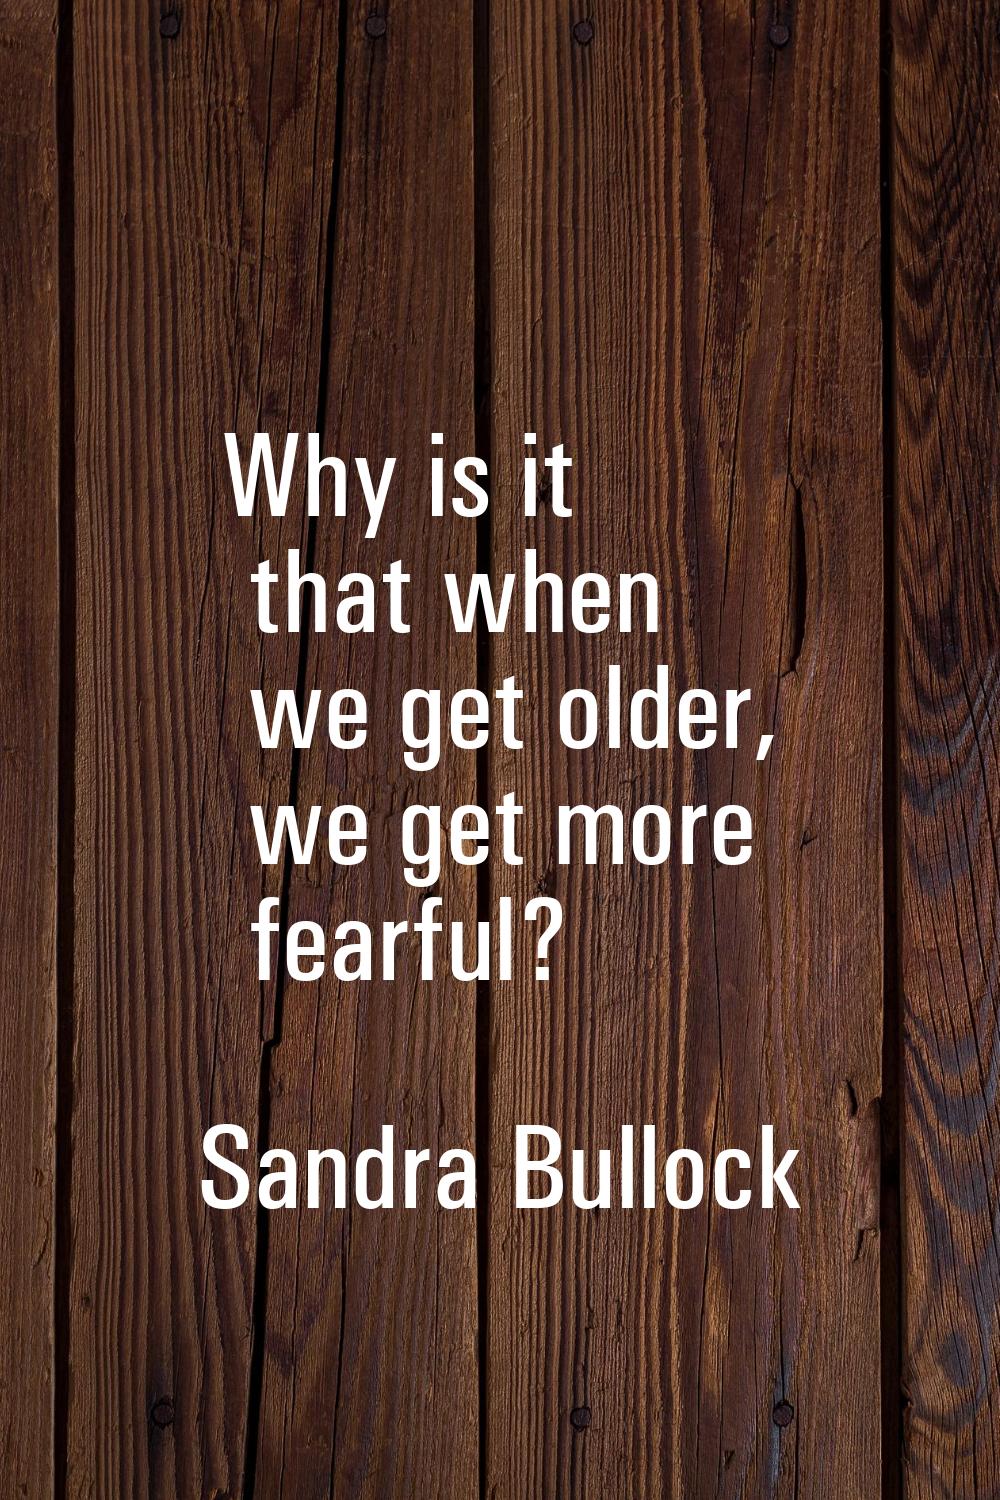 Why is it that when we get older, we get more fearful?